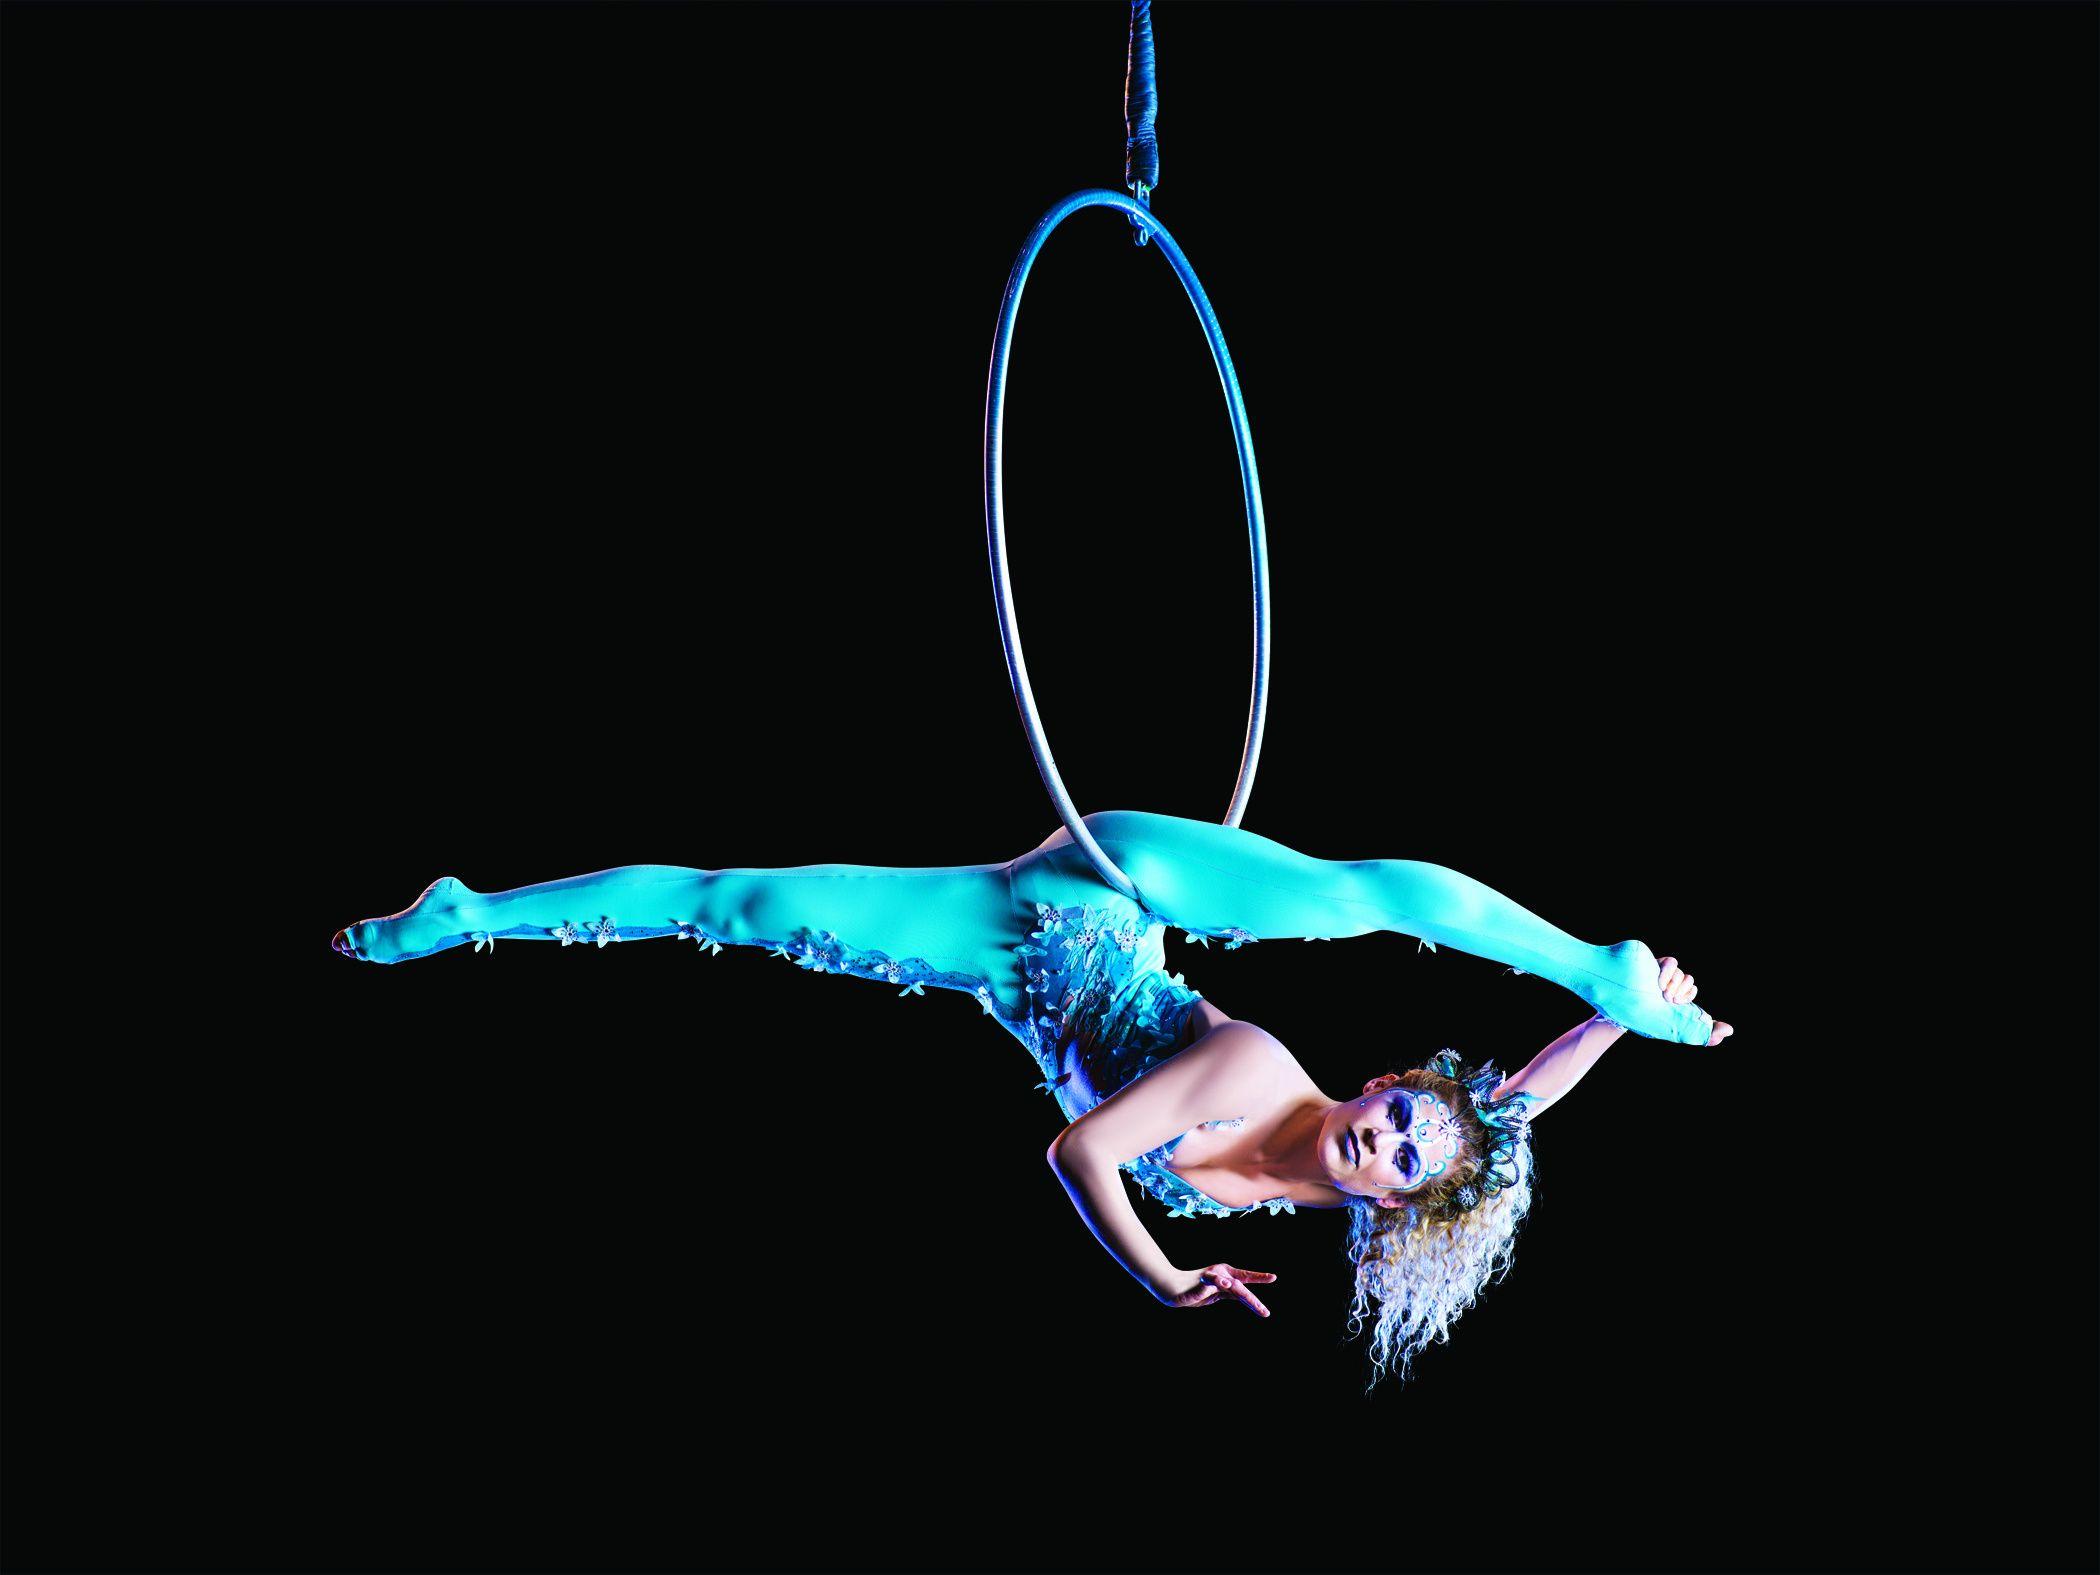 Cirque du Soleil image Hoop act HD wallpaper and background